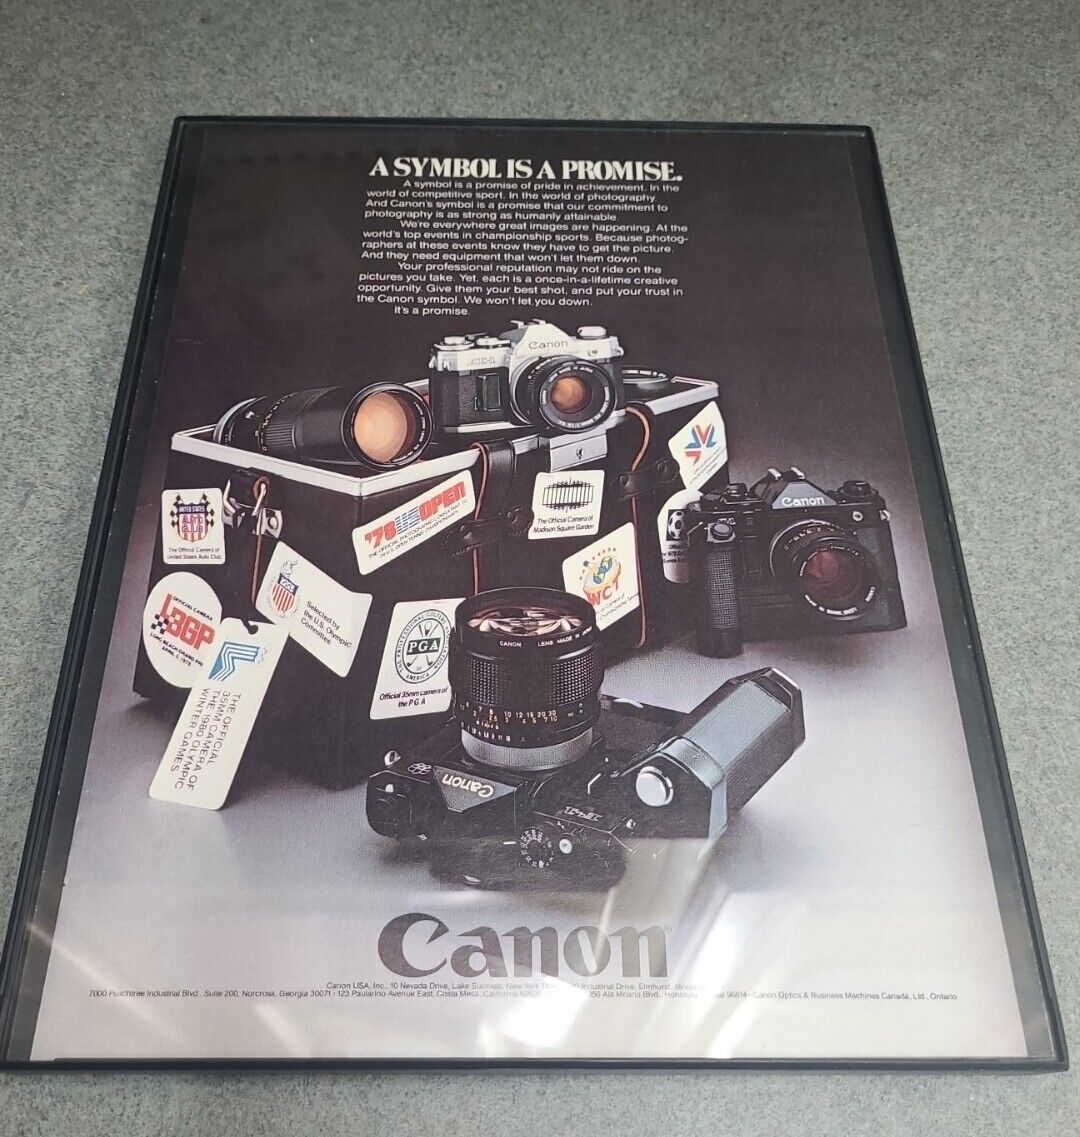 Canon Camera Print Ad 1979 A Symbol Is A Promise Framed 8.5x11 